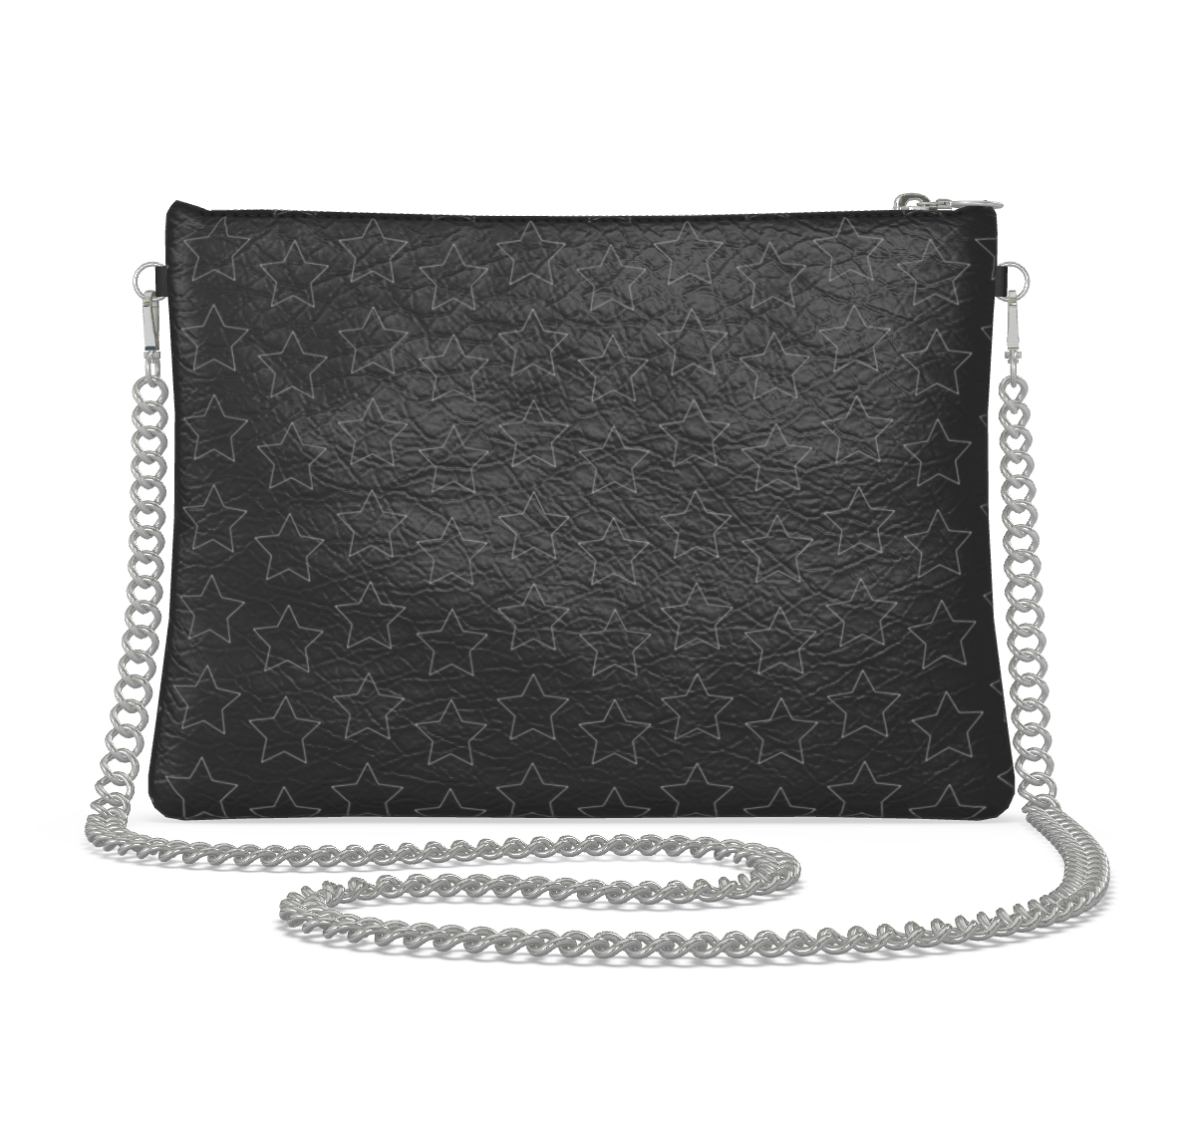 UNTITLED BOUTIQUE Black Leather Star Crossbody Bag With Silver Chain - Limited Edition